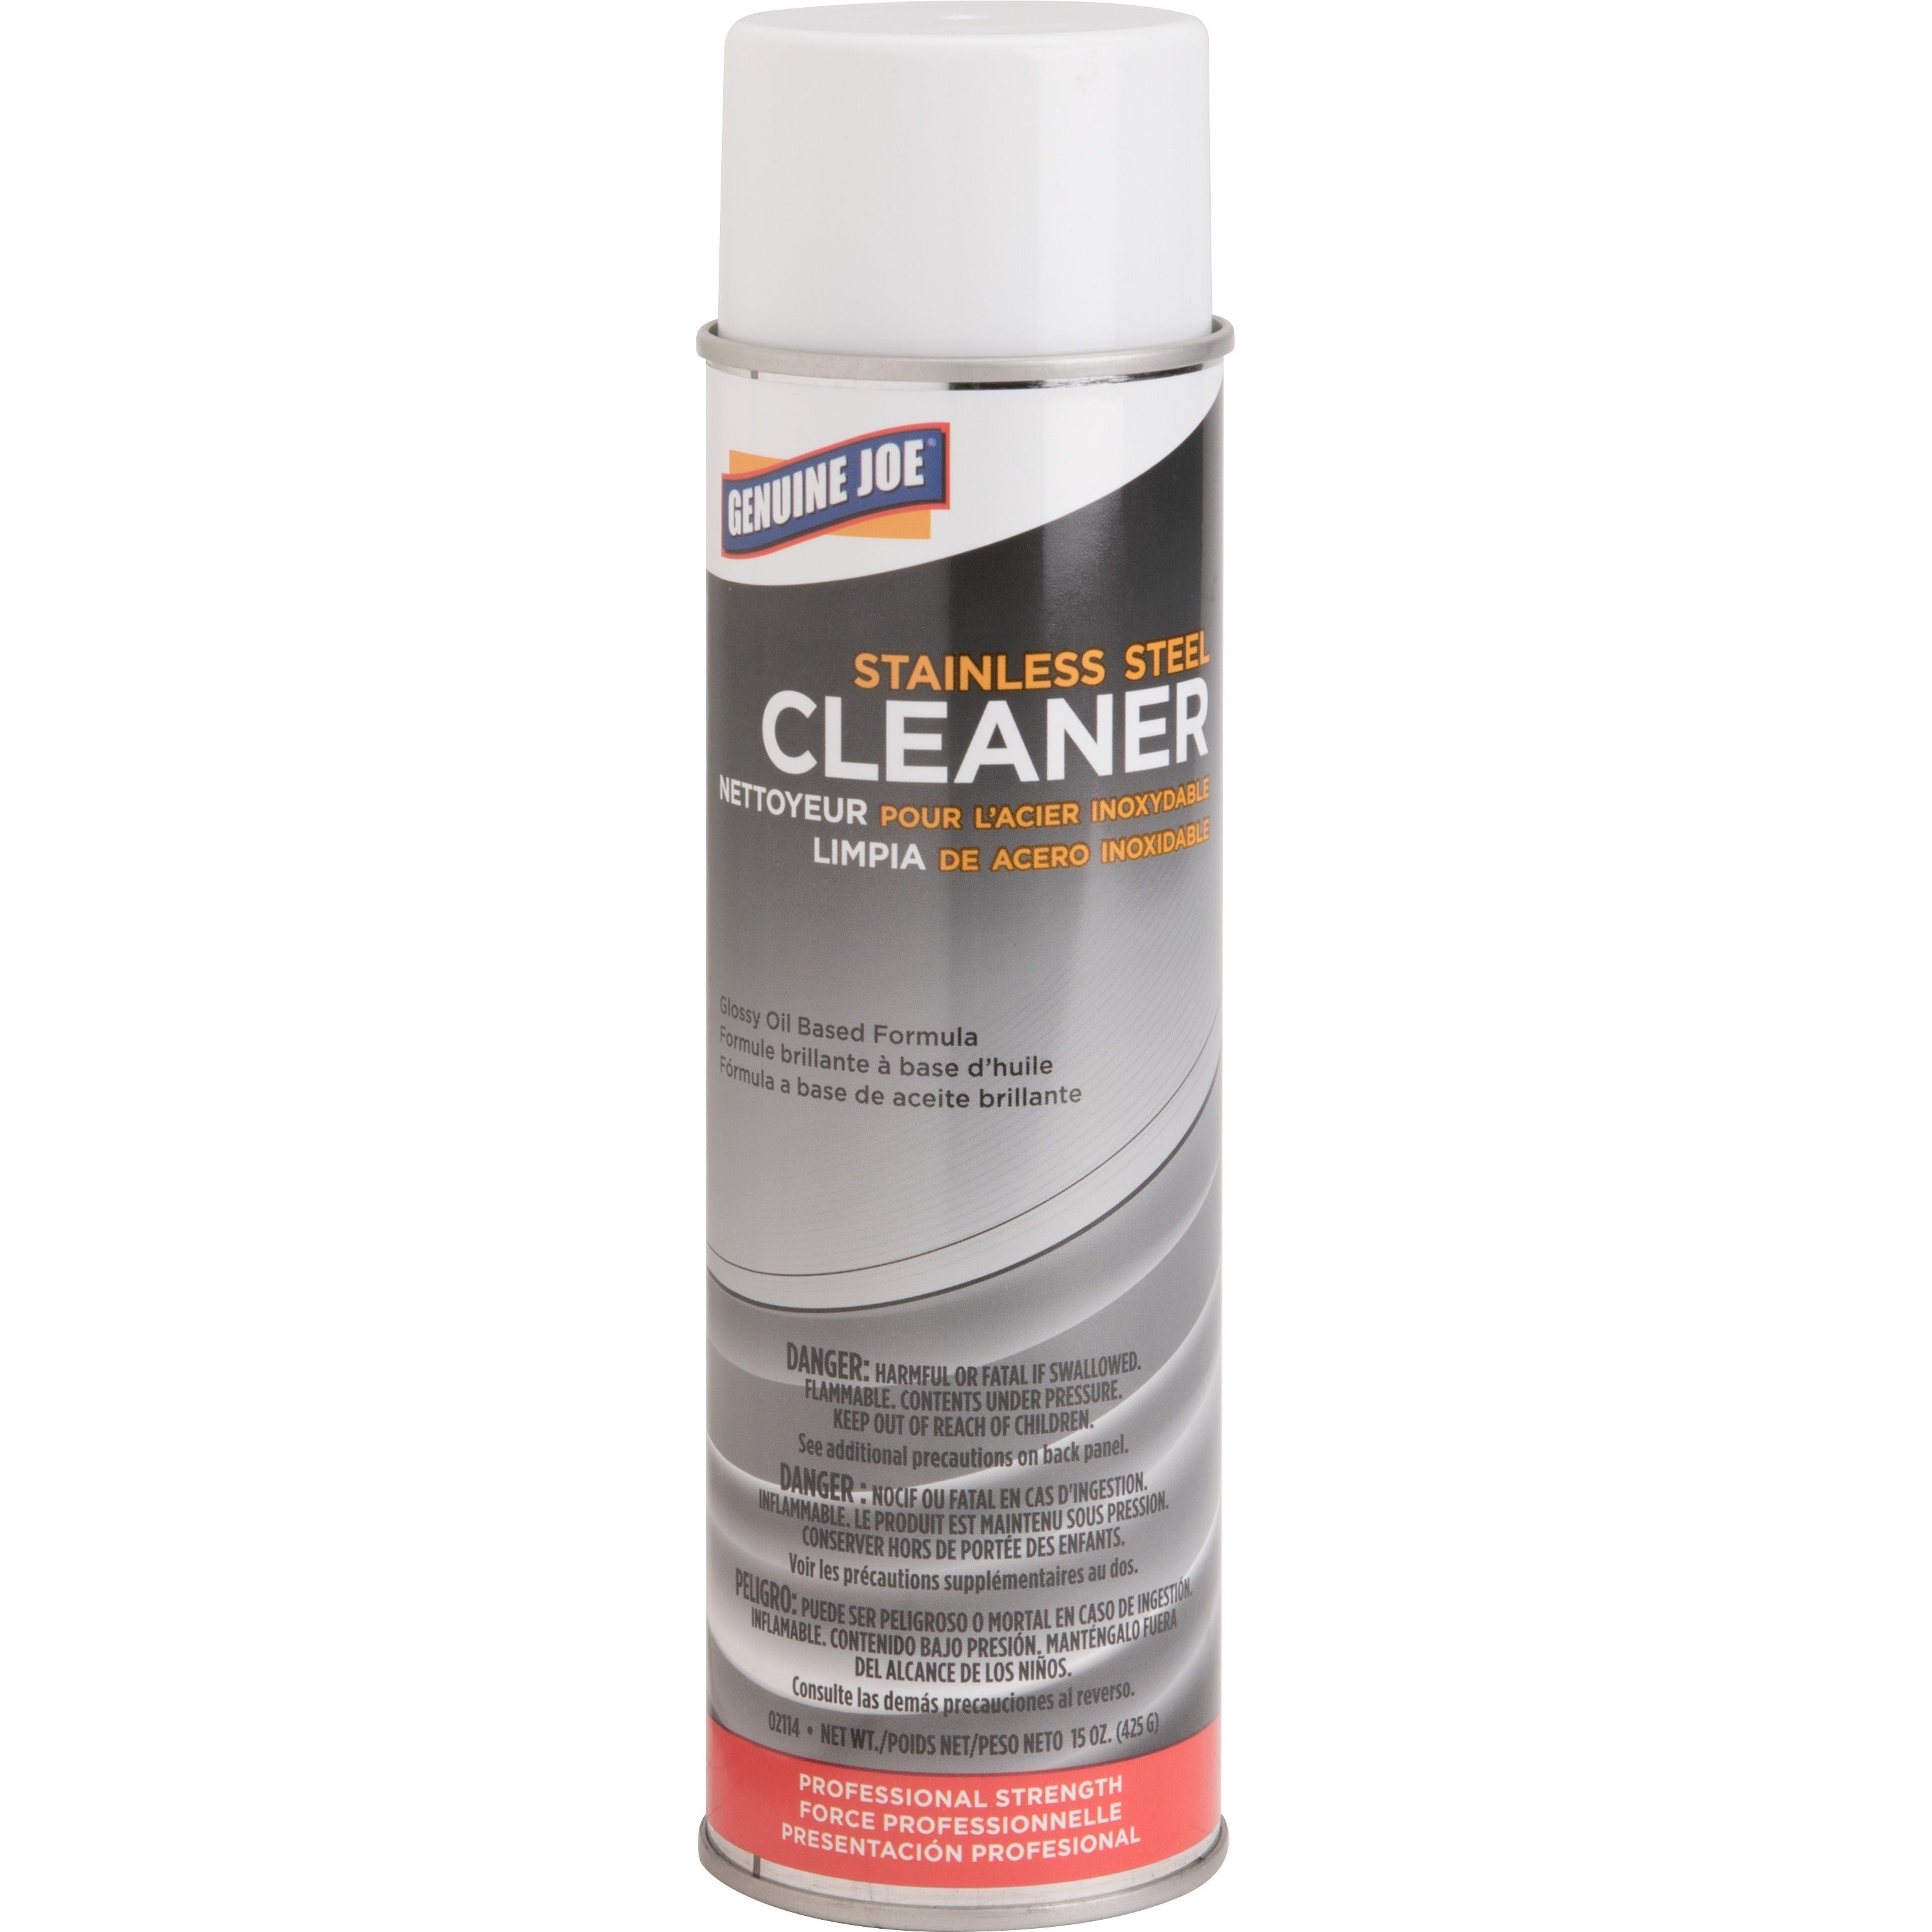 Genuine Joe Stainless Steel Cleaner - For Metal Surface - 15 fl oz (0.5 quart)Can - 1 Each - Pleasant Scent, Luster - Multi - 